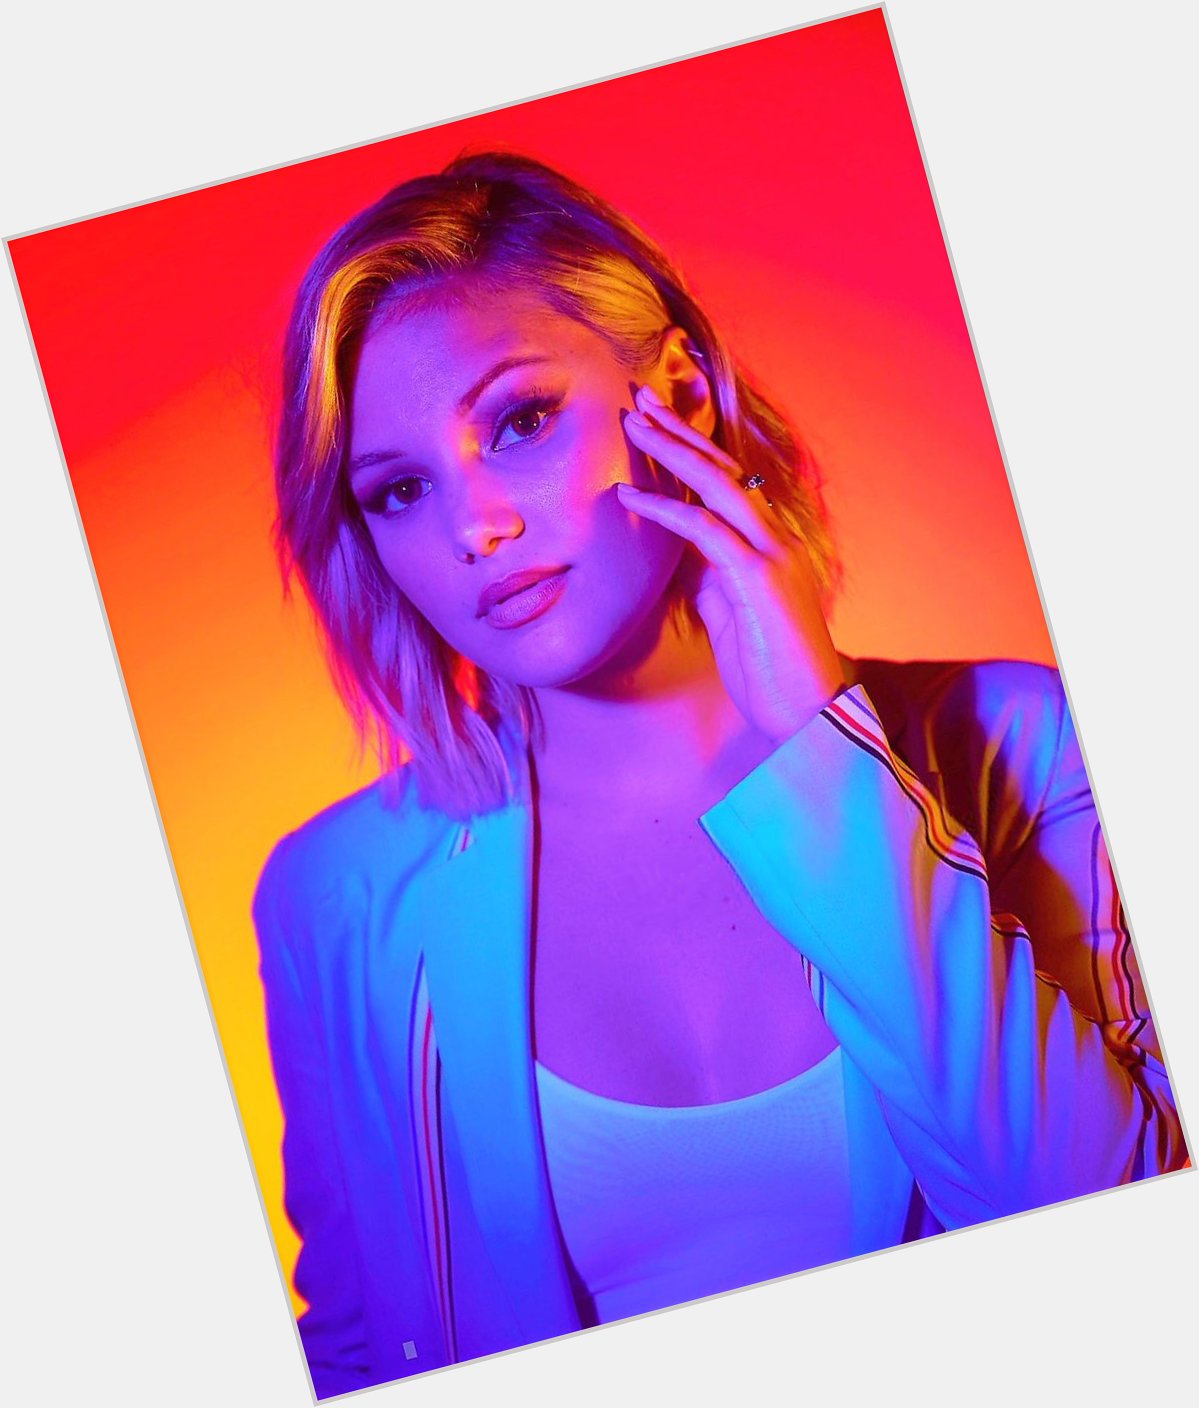 Olivia Holt is starting to become one of my favorites. Happy 22nd birthday Olivia! 